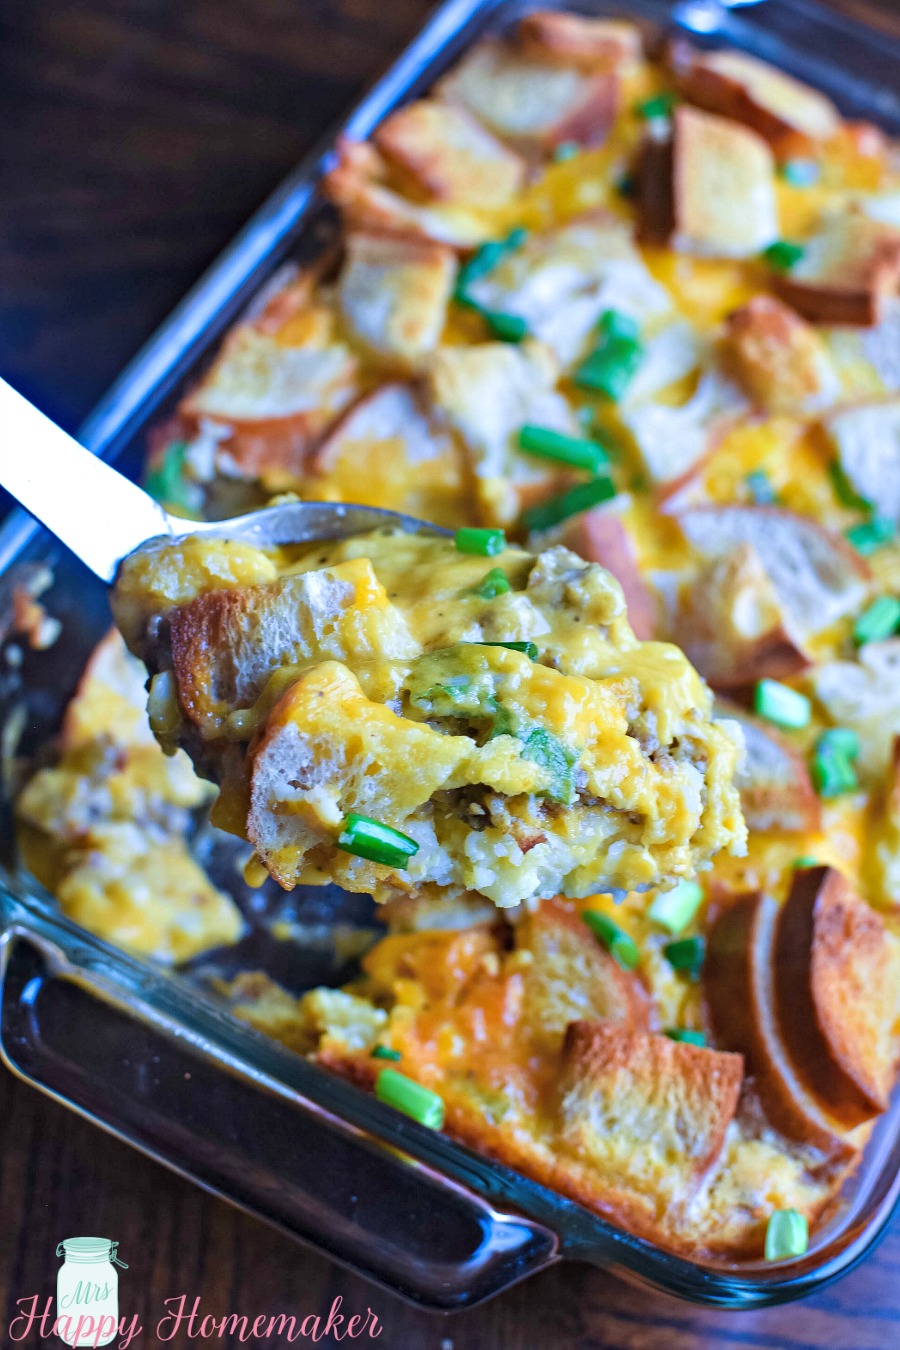 This Country Breakfast Casserole has eggs, cheese, buttered toast, sausage, & gravy with a hash brown crust.